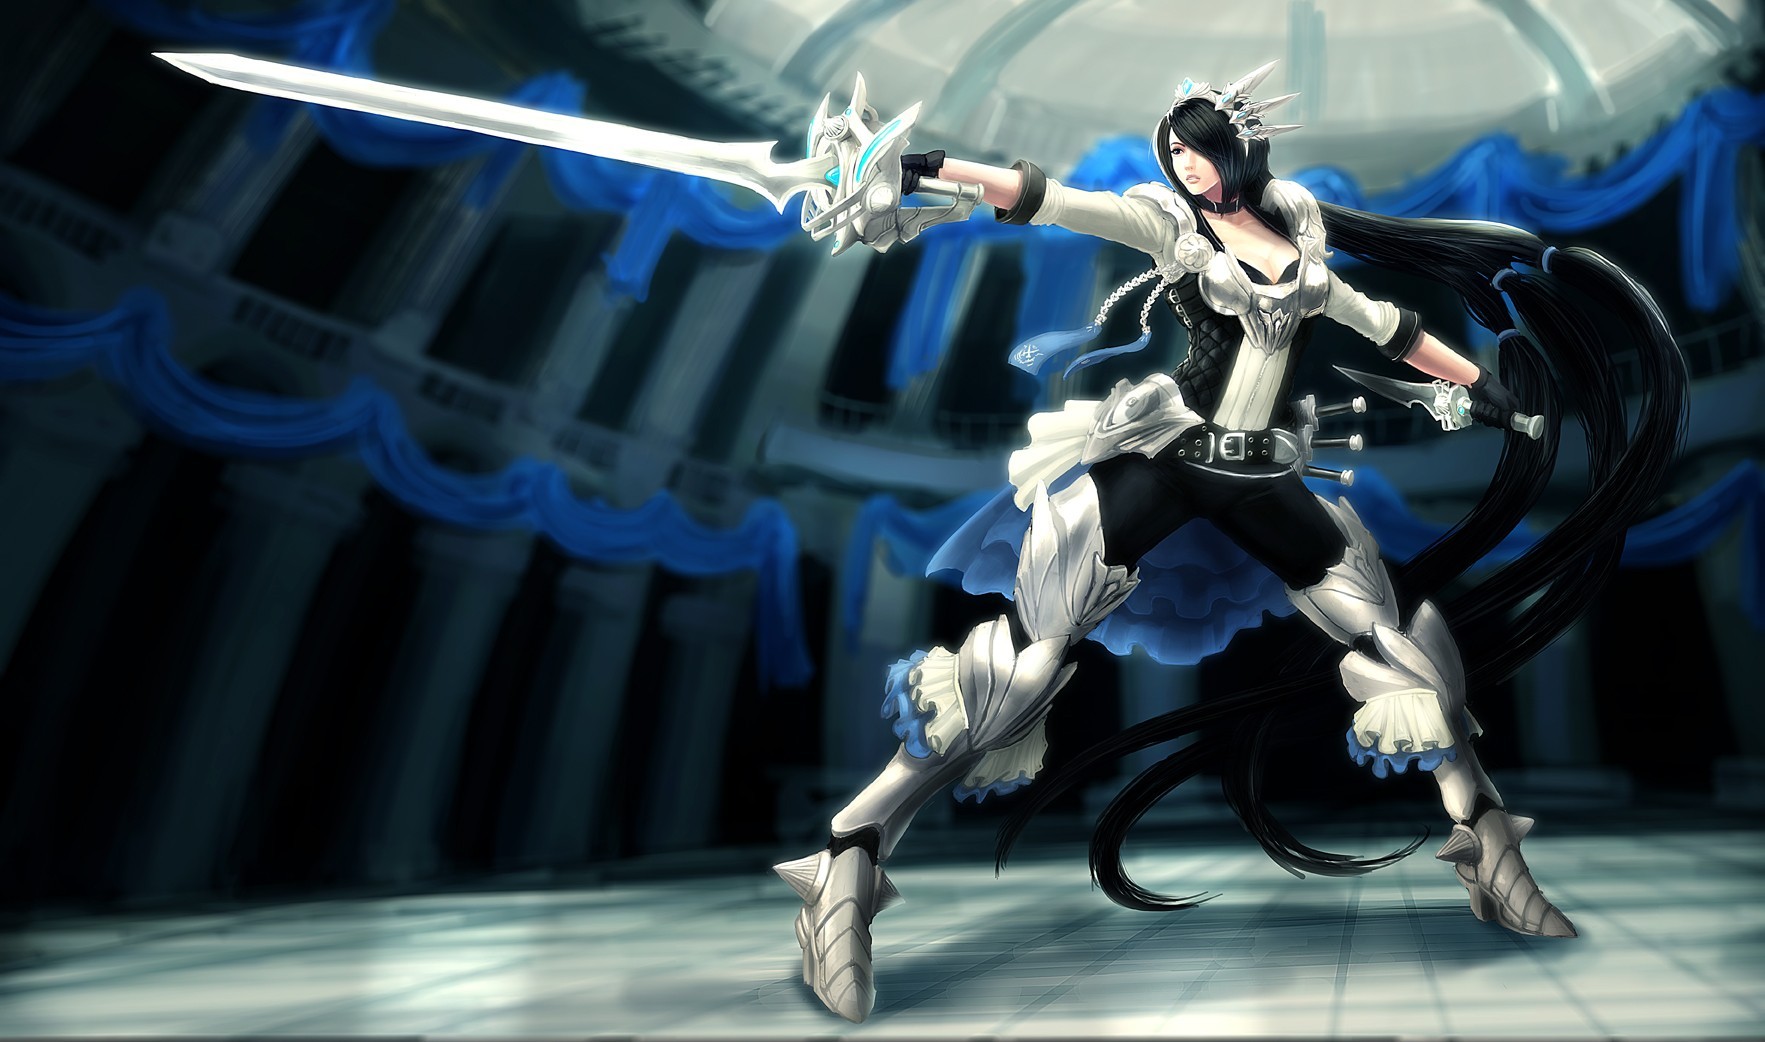 General 1765x1042 League of Legends Fiora (League of Legends) PC gaming anime girls anime sword fantasy girl black hair women with swords weapon standing fantasy armor spread legs long hair video game art video game girls